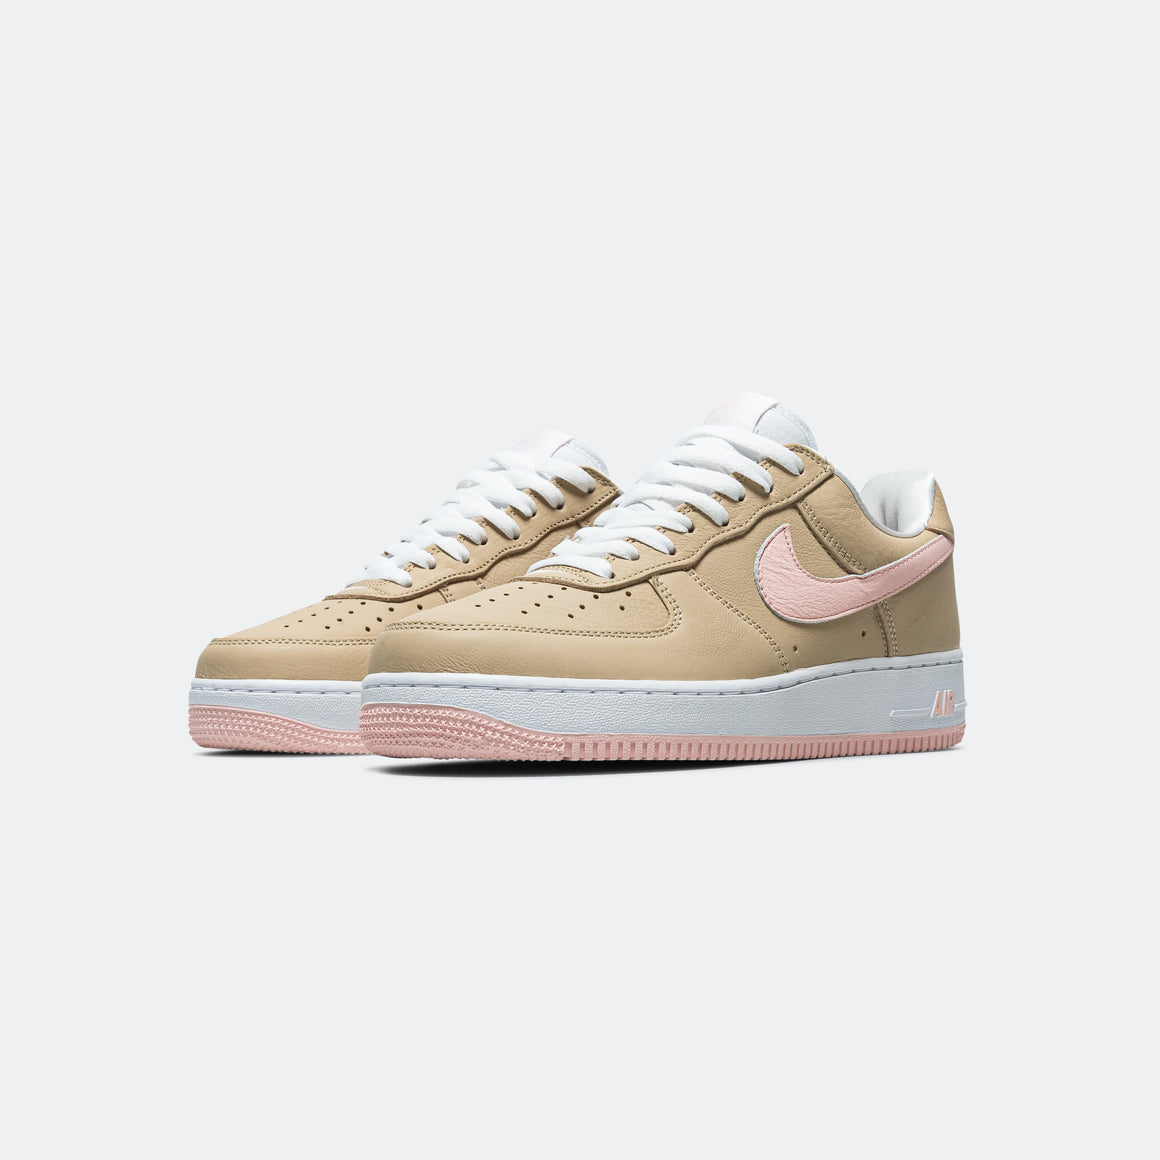 Nike - Air Force 1 Linen - Linen/Atmosphere-True White - UP THERE